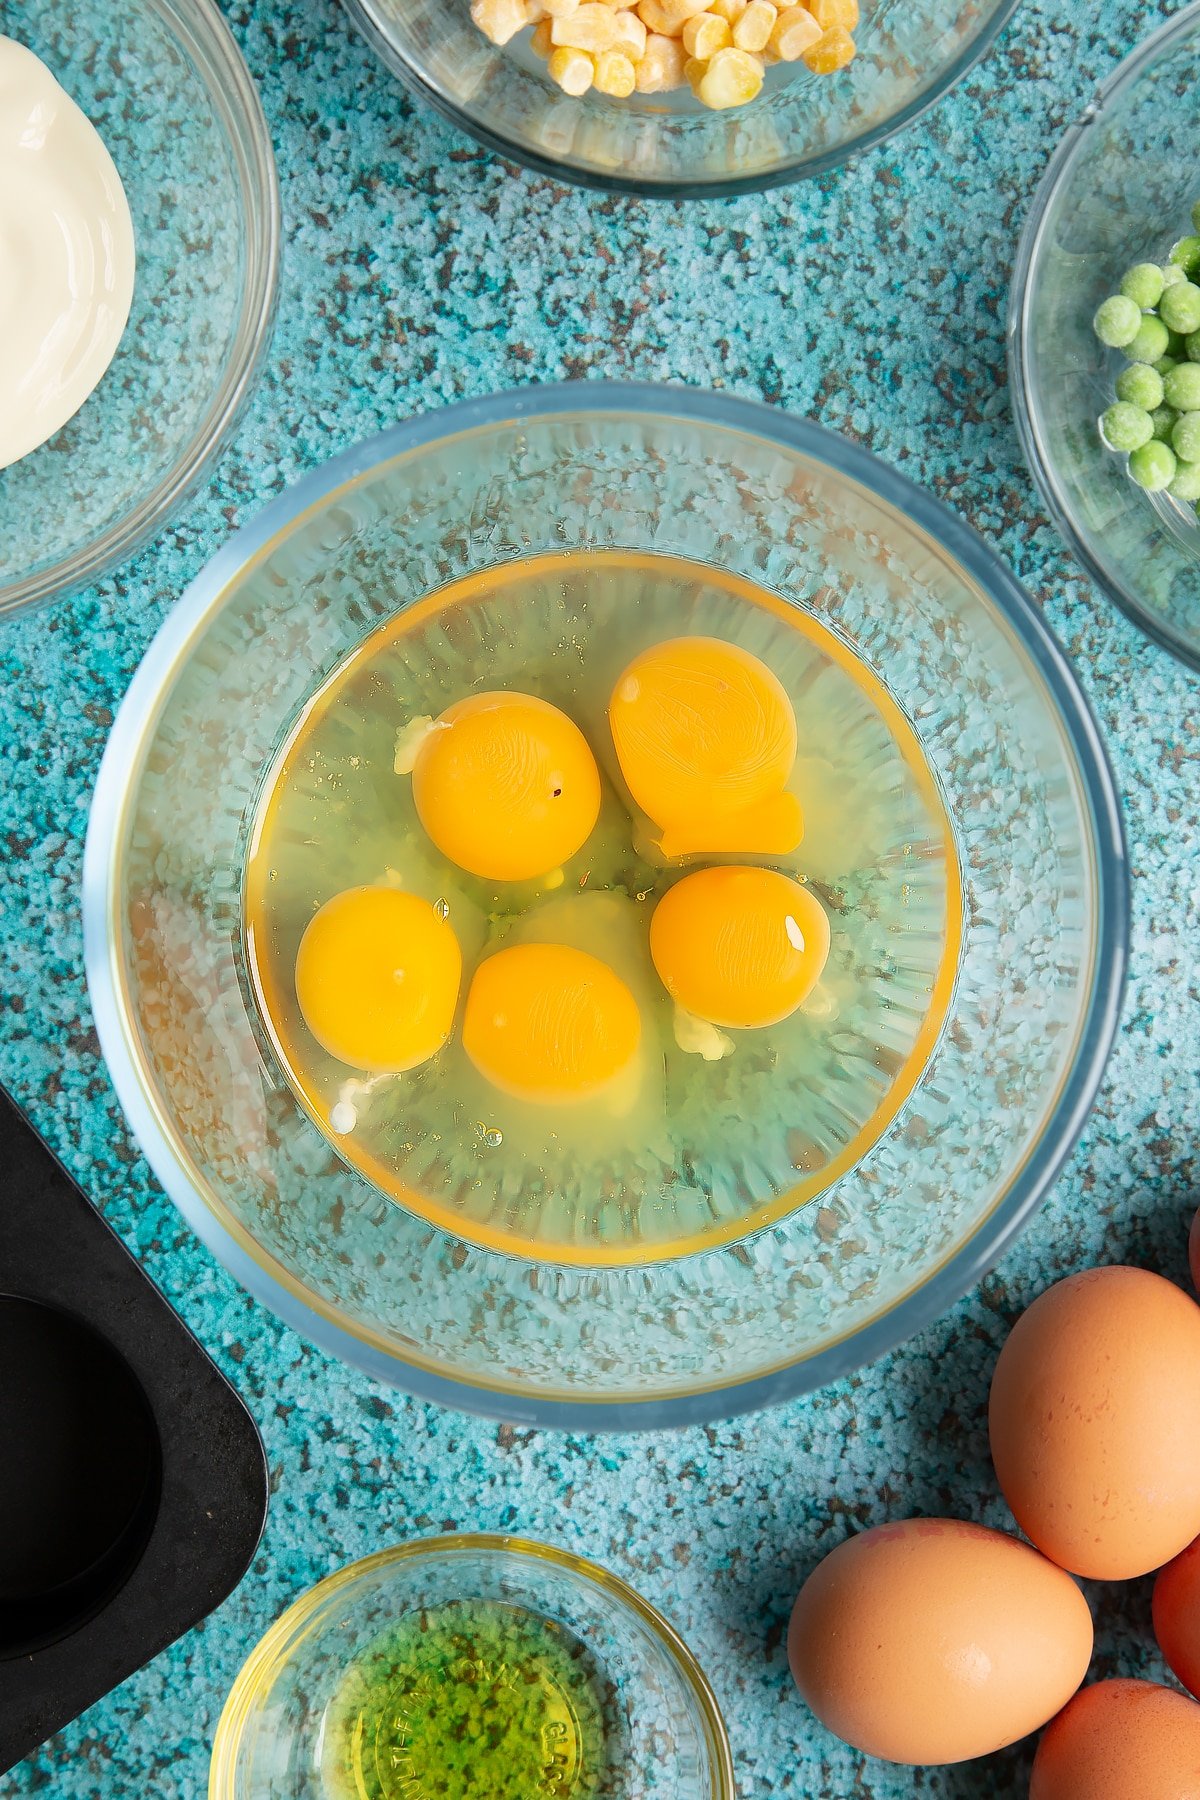 Eggs in a mixing bowl. Ingredients to make mini vegetable frittatas surround the bowl.